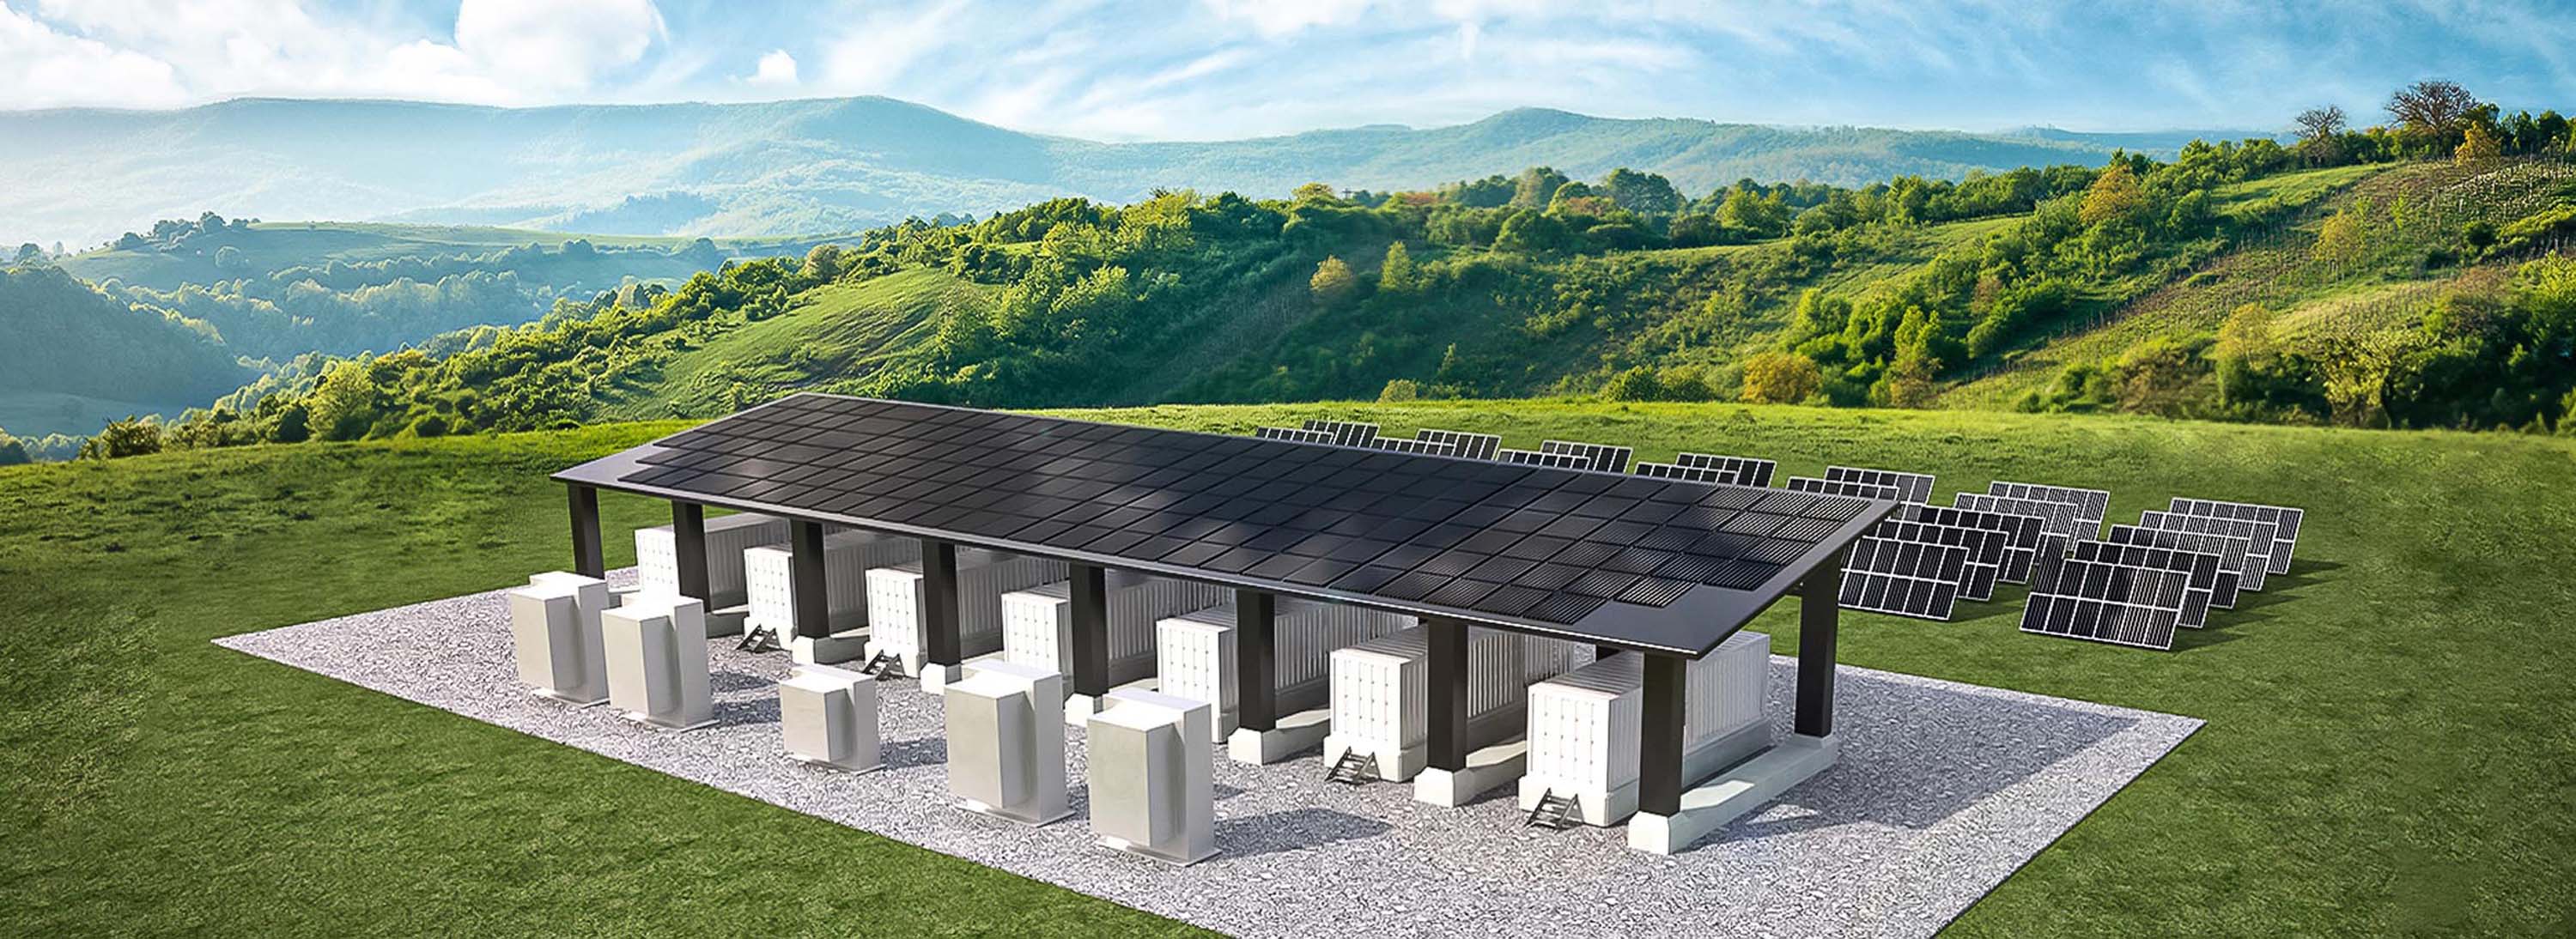 Neliaxi Commercial & Industrial Energy Storage System 